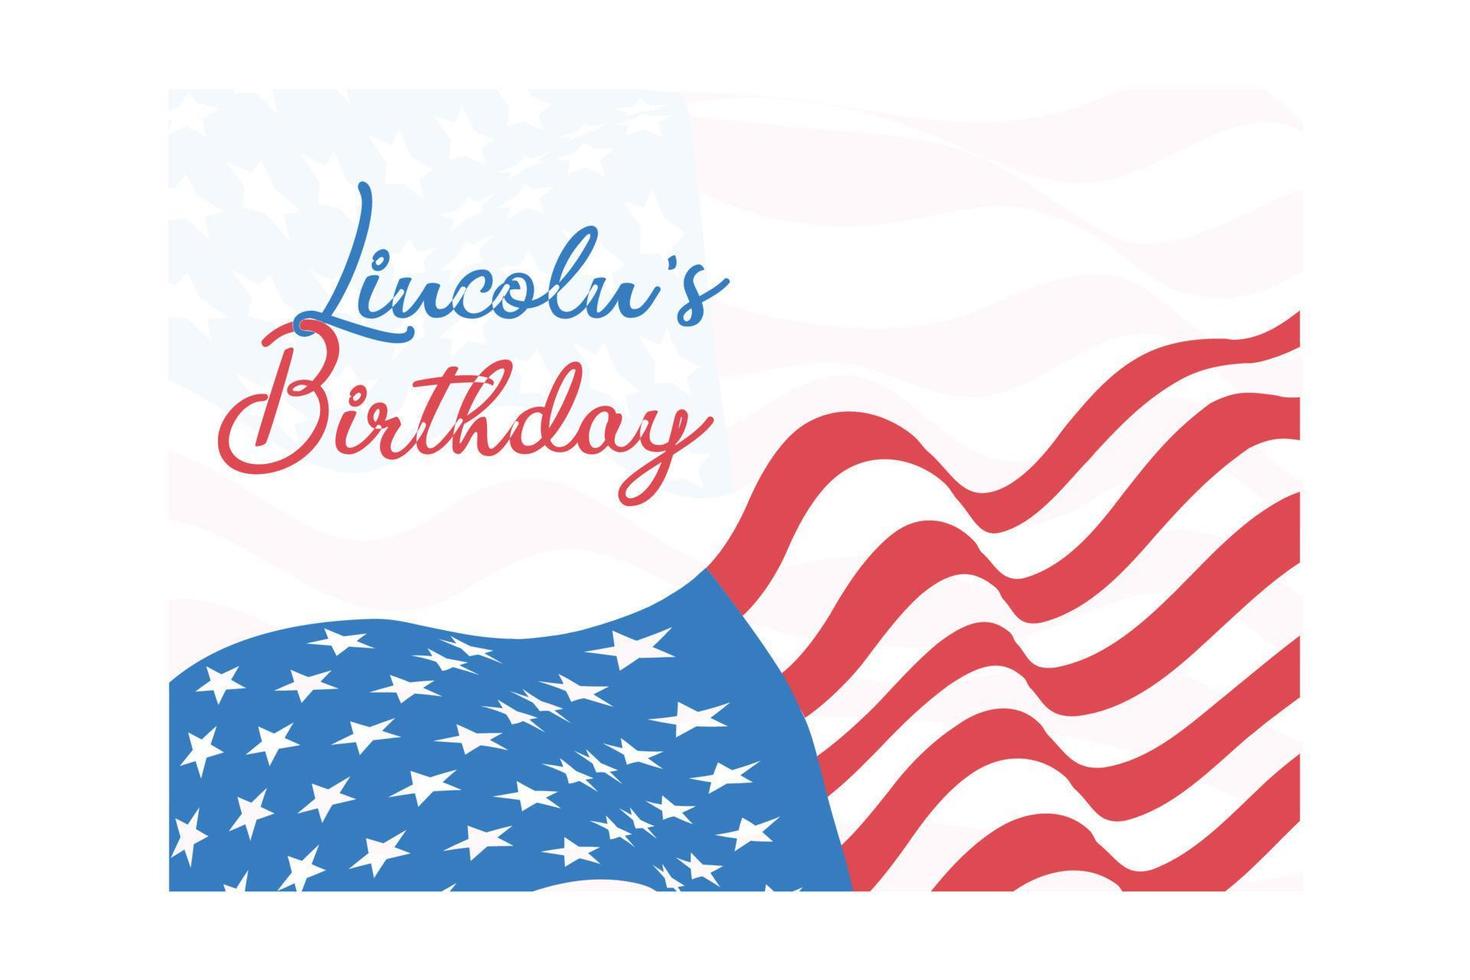 Lincoln's birthday holiday background vector, USA banner template, poster, billboard, card, invitation, flat vector modern illustration